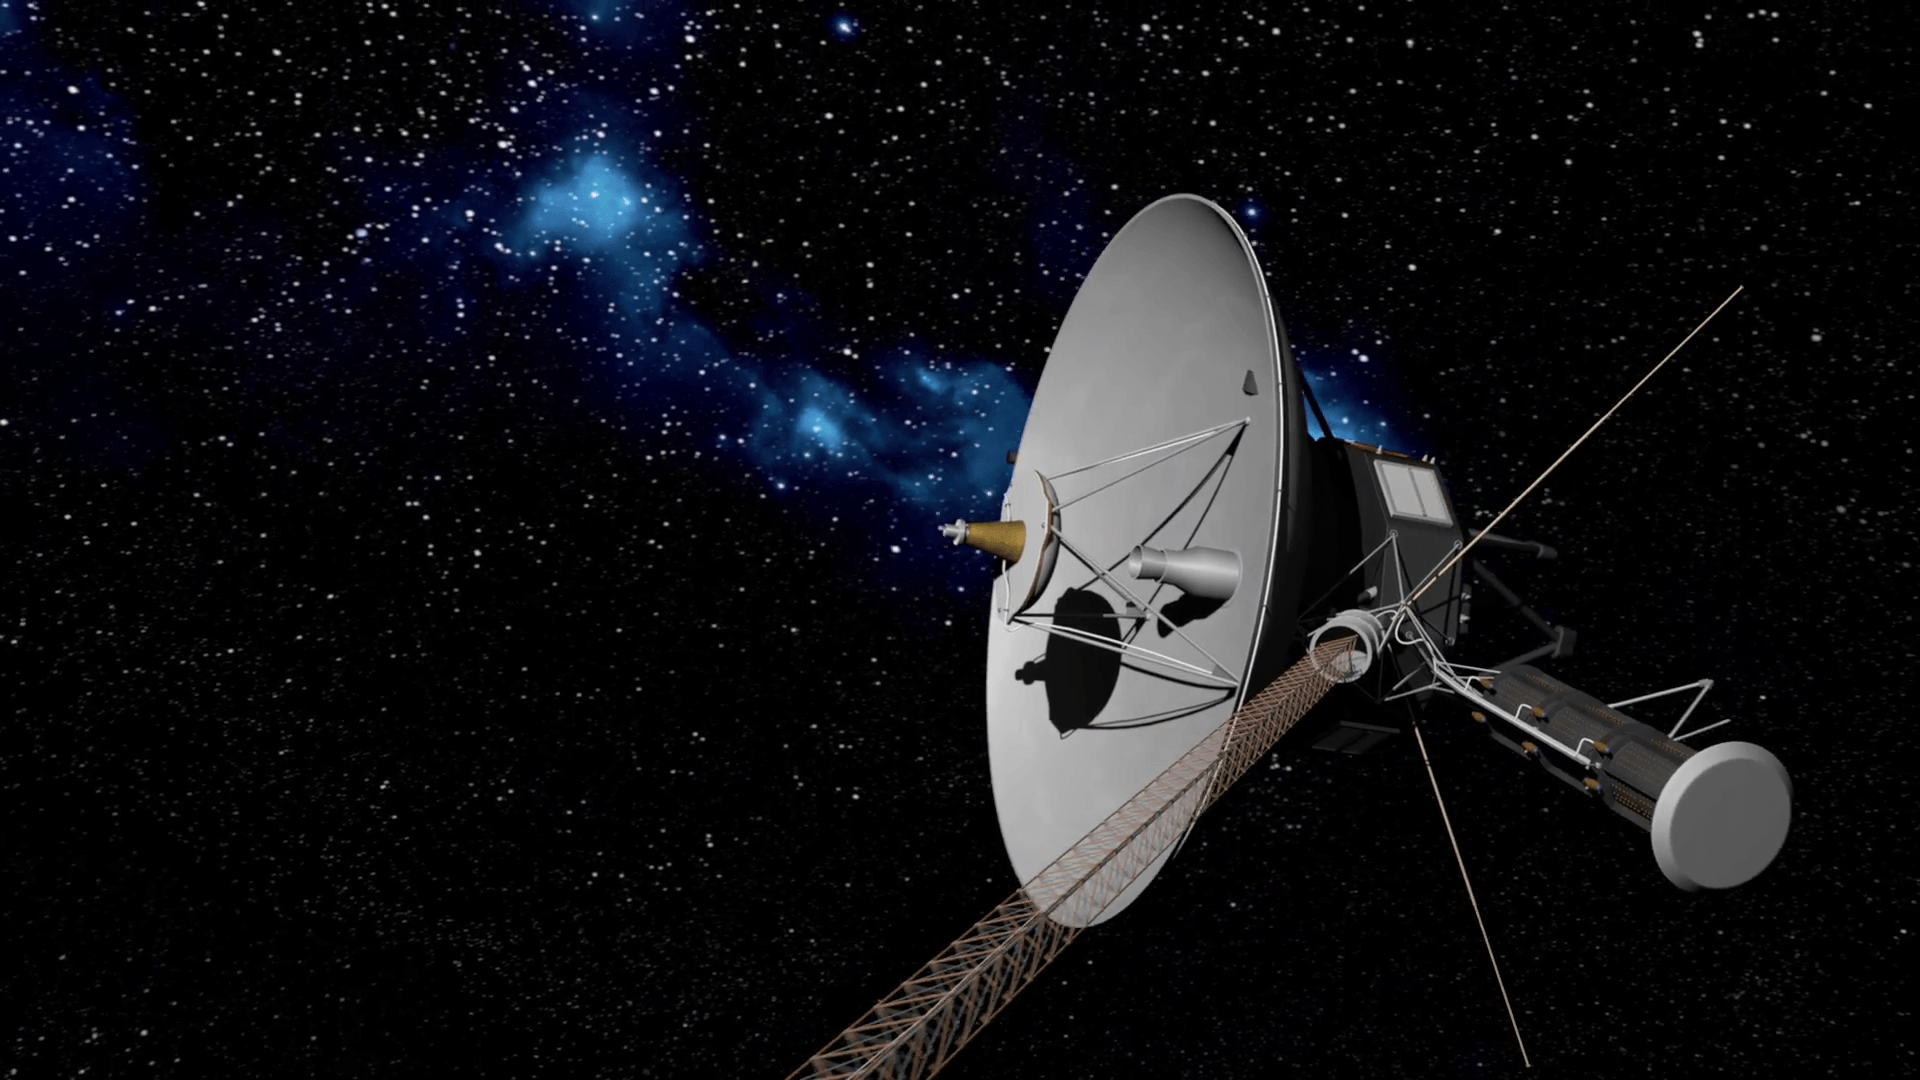 image of Voyager 1 Space Probe Information - #SpaceHero